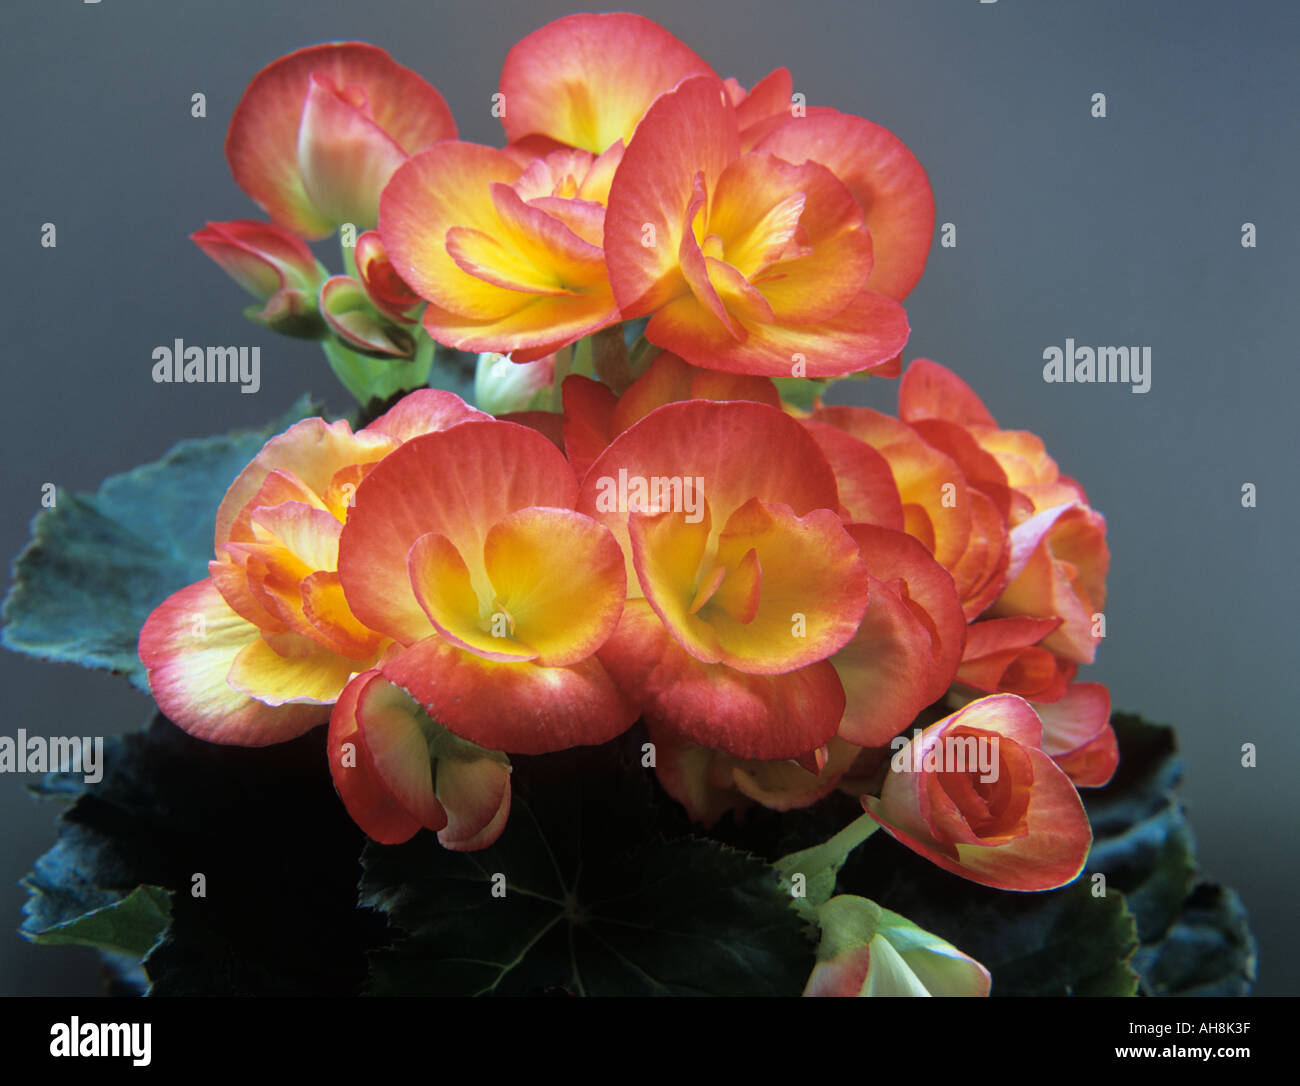 STUDIO STILL LIFE Close up of a pink and yellow flowers of Begonia plant with a dark background Stock Photo